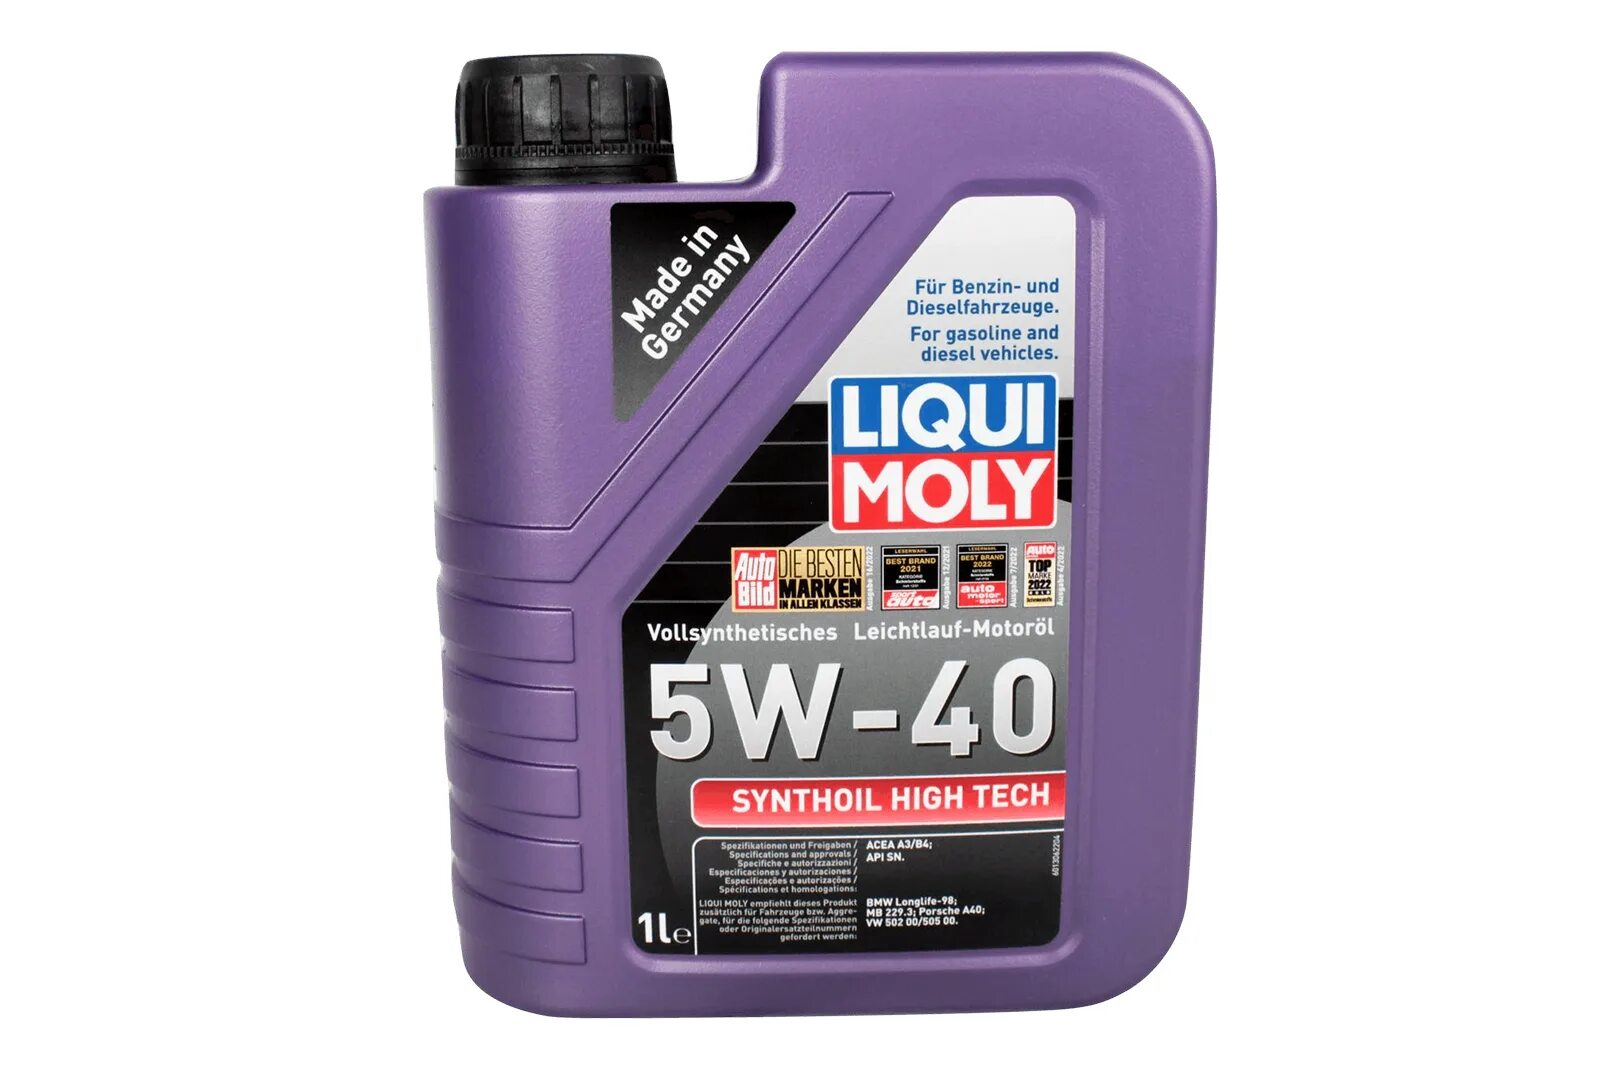 Масло моторное synthoil high tech. Liqui Moly Synthoil High Tech 5w-40. Synthoil High Tech 5w-40 1л. Liqui Moly 5w40 Synthoil High Tech 4л. Liqui Moly Synthoil High Tech 5w-40 1856.